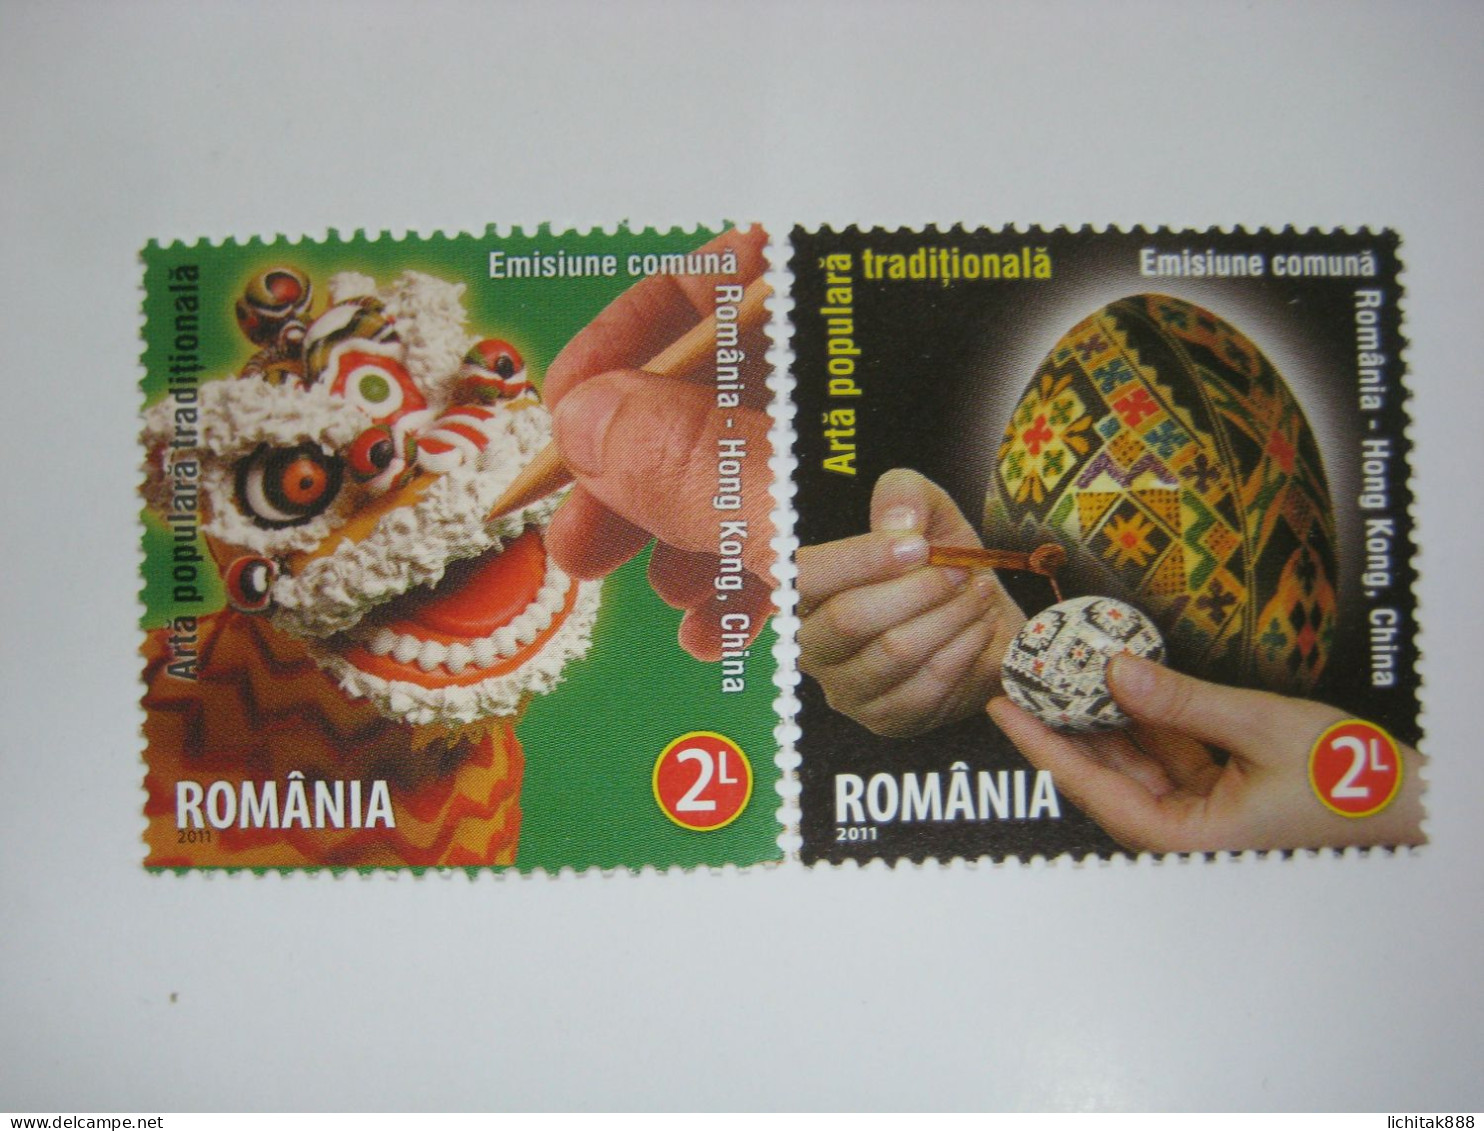 Romania 2011 Handicraft / Art Stamps Set Joint Issue HK MNH - Local Post Stamps